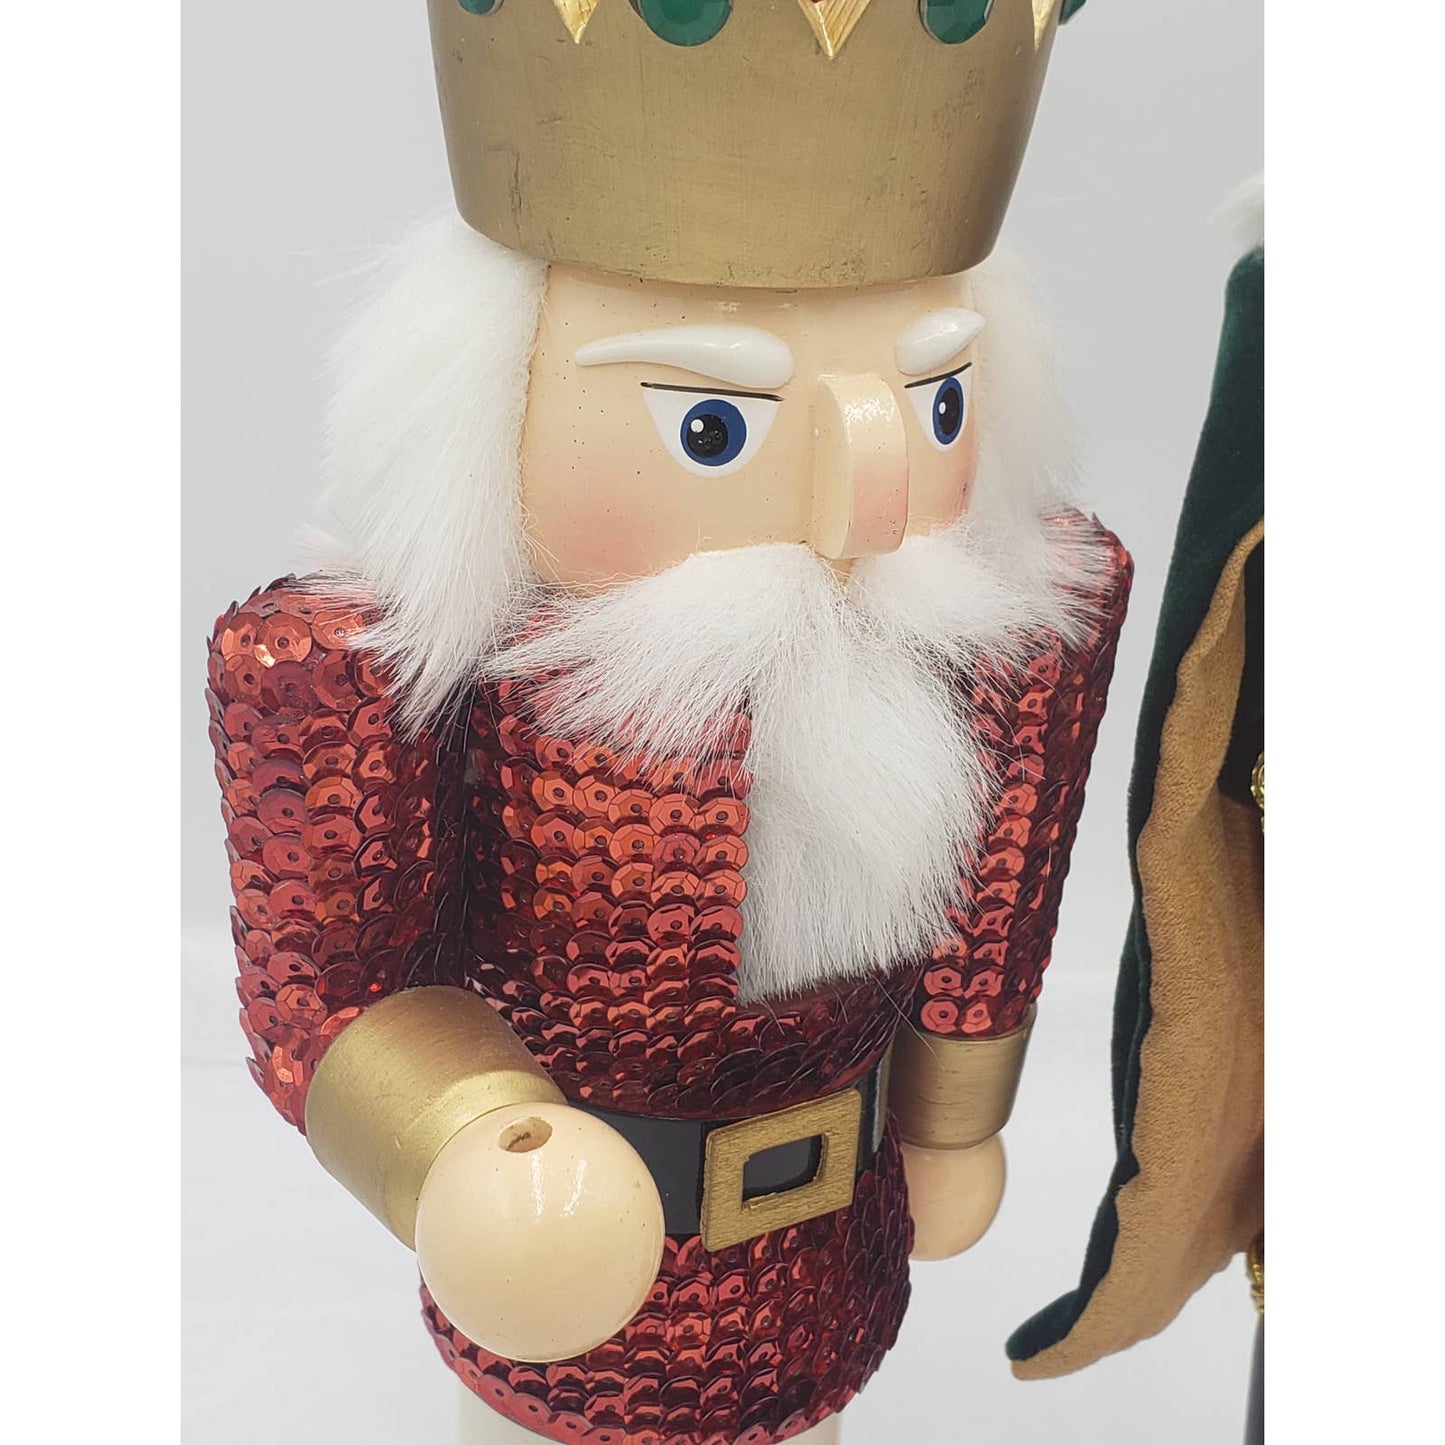 Nutcracker Set of 3 King With Cape, Drummer, Jeweled and Bedazzled Nutcrackers